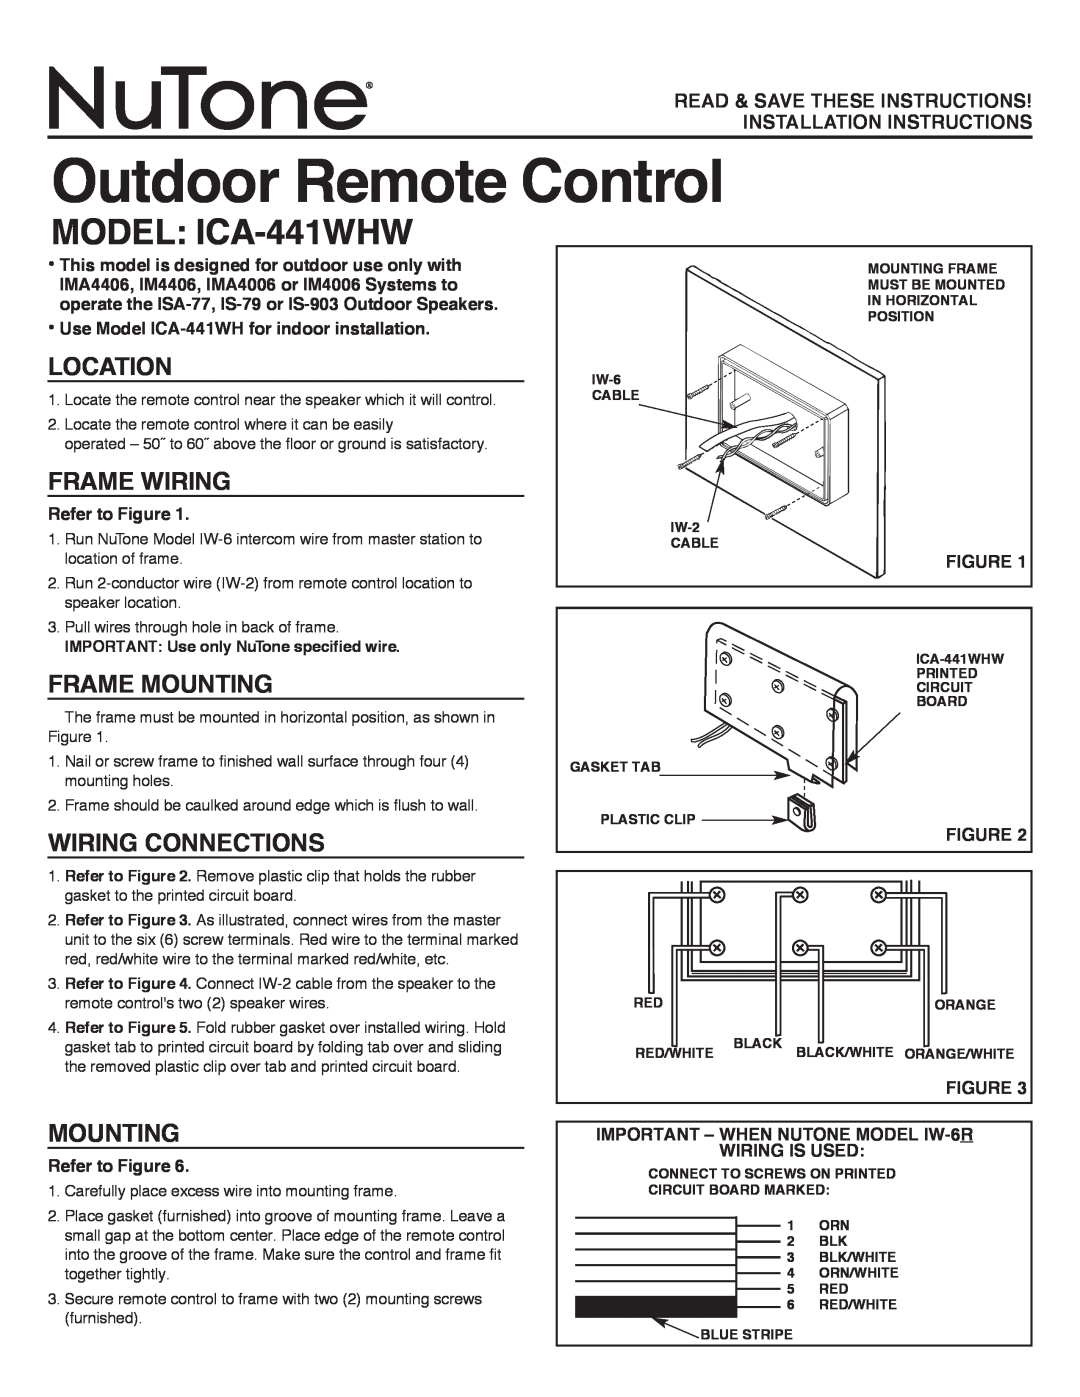 NuTone installation instructions Use Model ICA-441WH for indoor installation, Refer to Figure, MODEL ICA-441WHW 